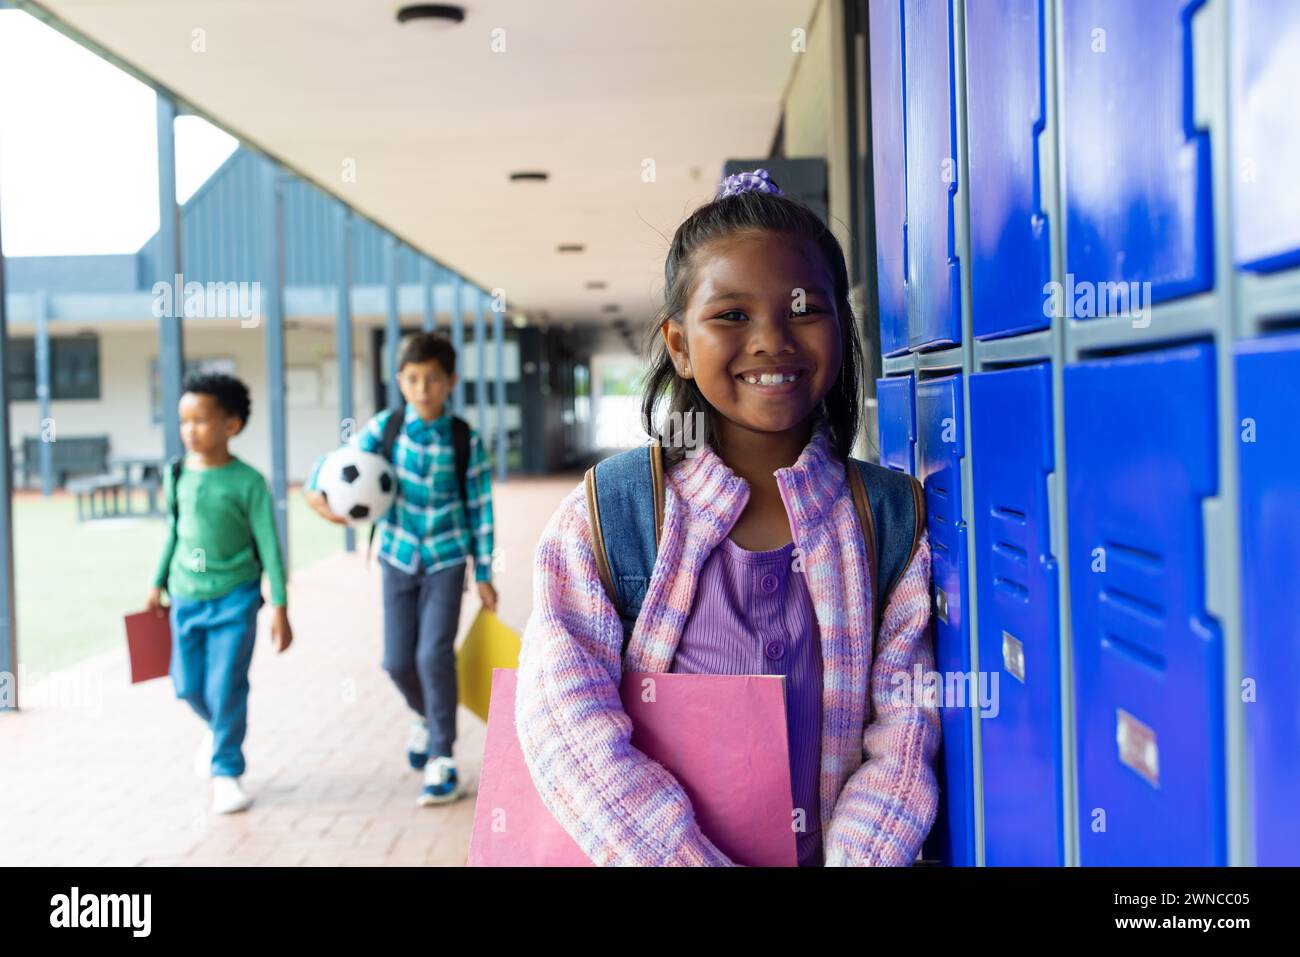 Biracial girl with a purple backpack smiles by school blue lockers, boys in the background Stock Photo